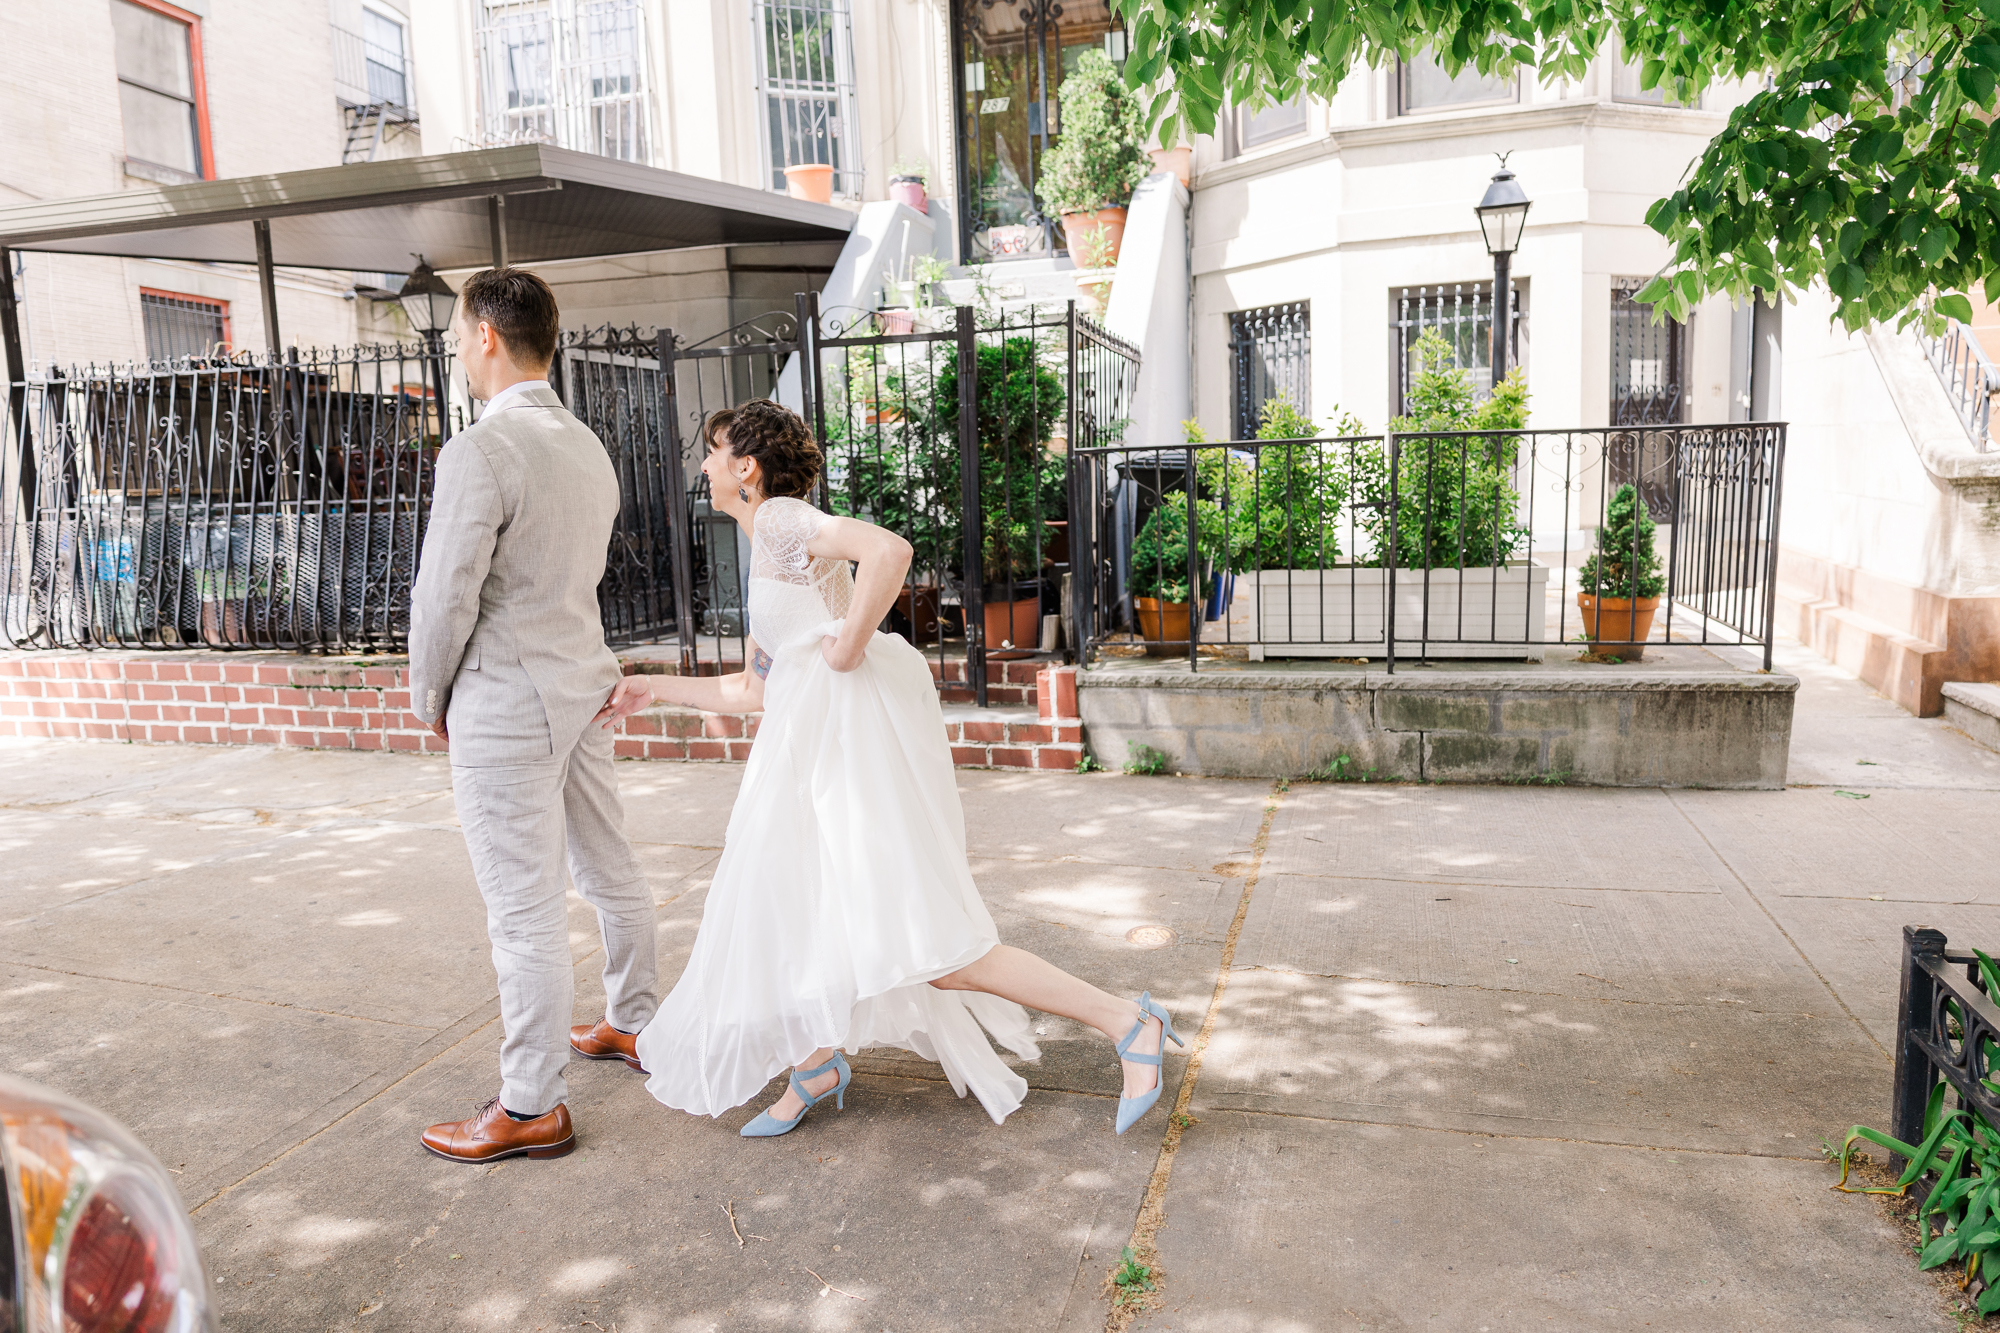 Gorgeous MyMoon Wedding Photo Gallery in Summertime